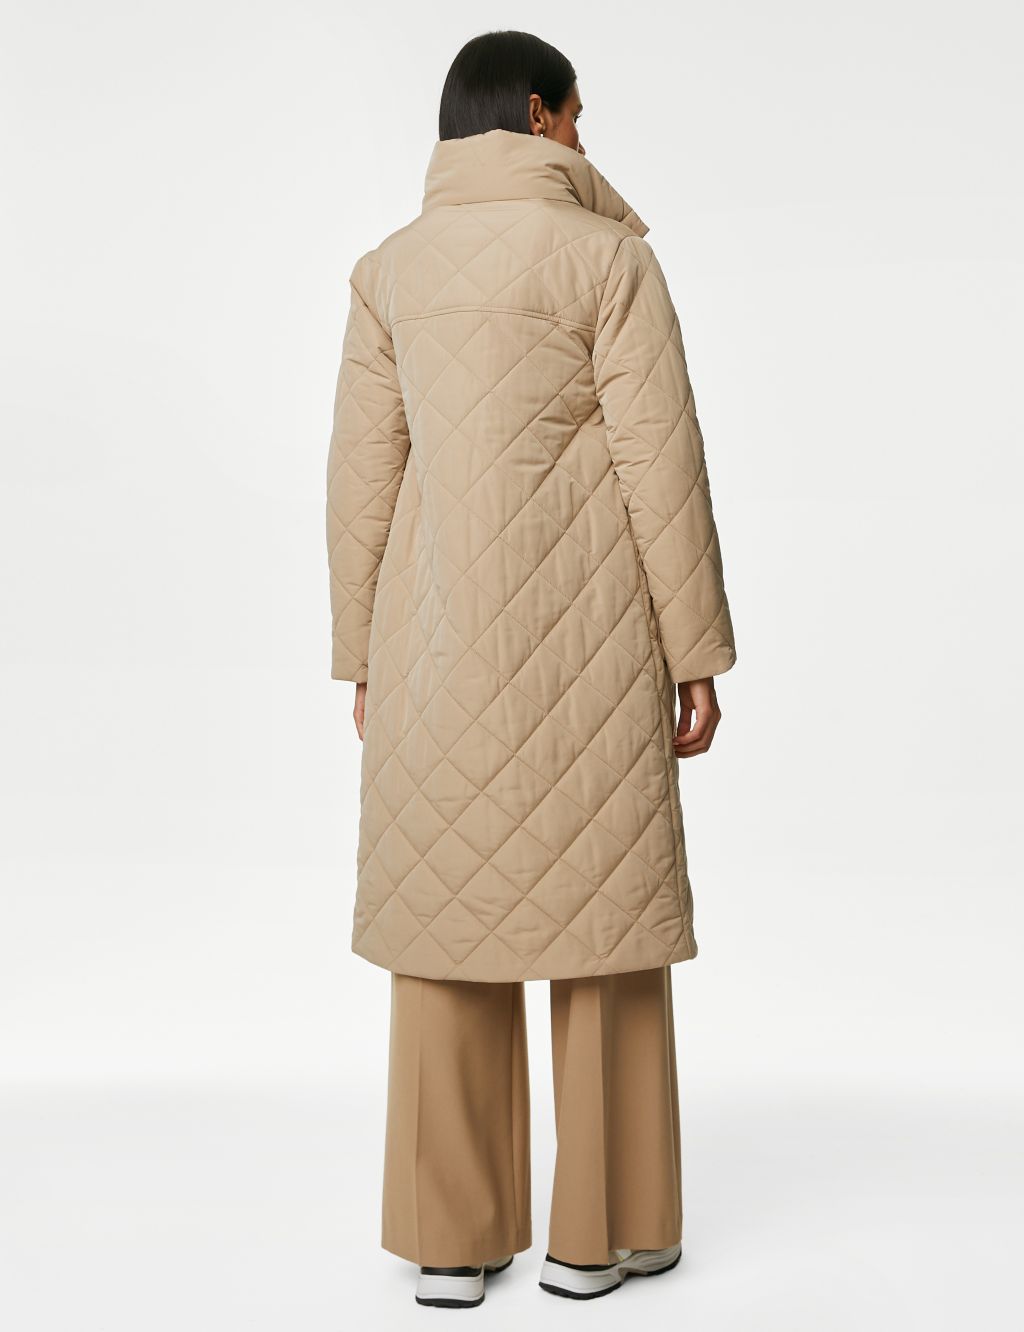 Diamond Quilted Funnel Neck Longline Coat image 6